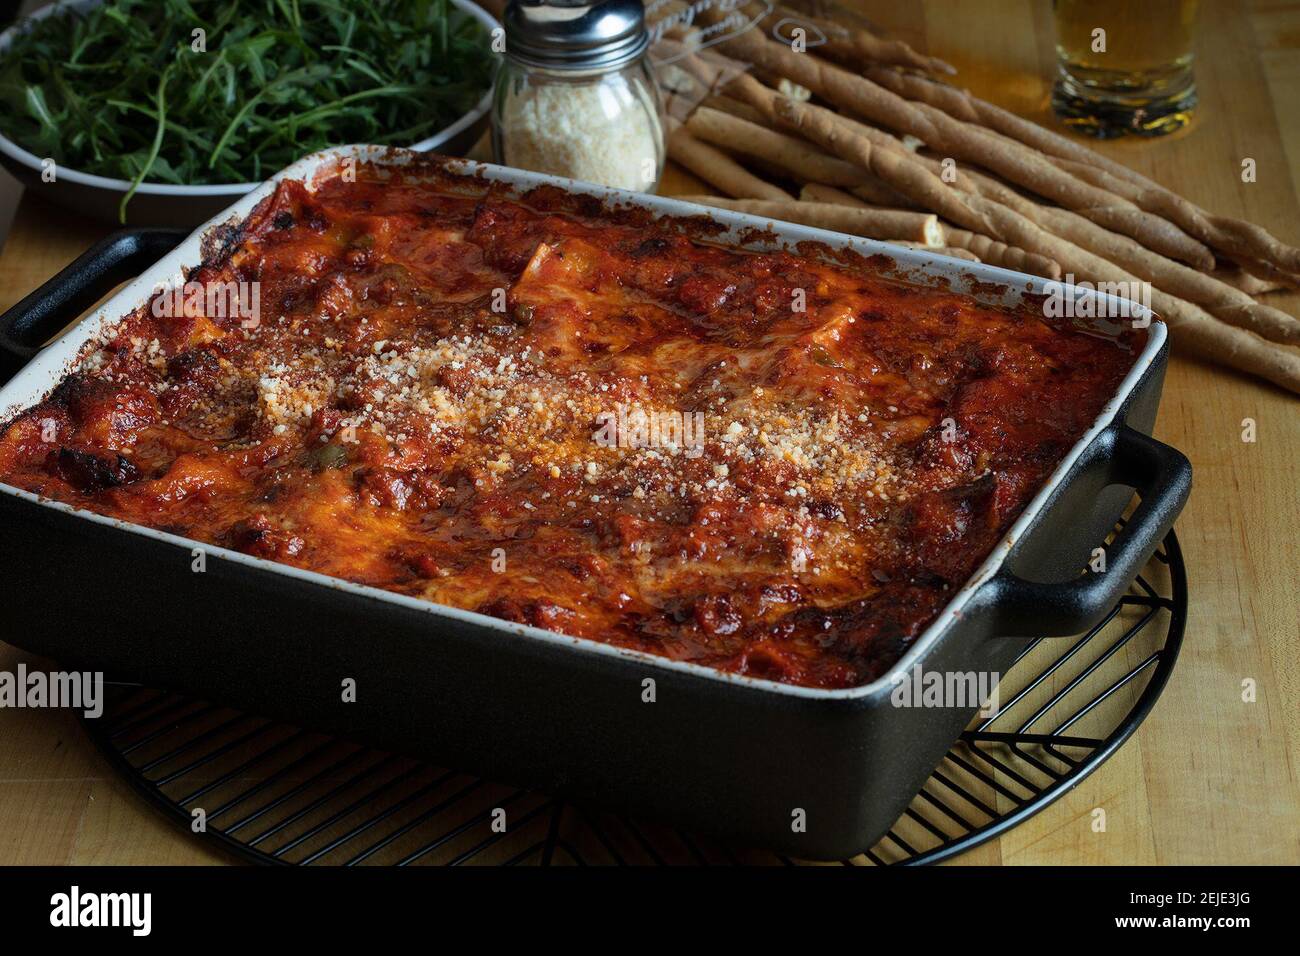 Fear not if your first attempt (or your first several attempts) at lasagna making is not as glorious as you would hope. Everything can be improved with practice and repetition. (E. Jason Wambsgans/Chicago Tribune/TNS) Stock Photo